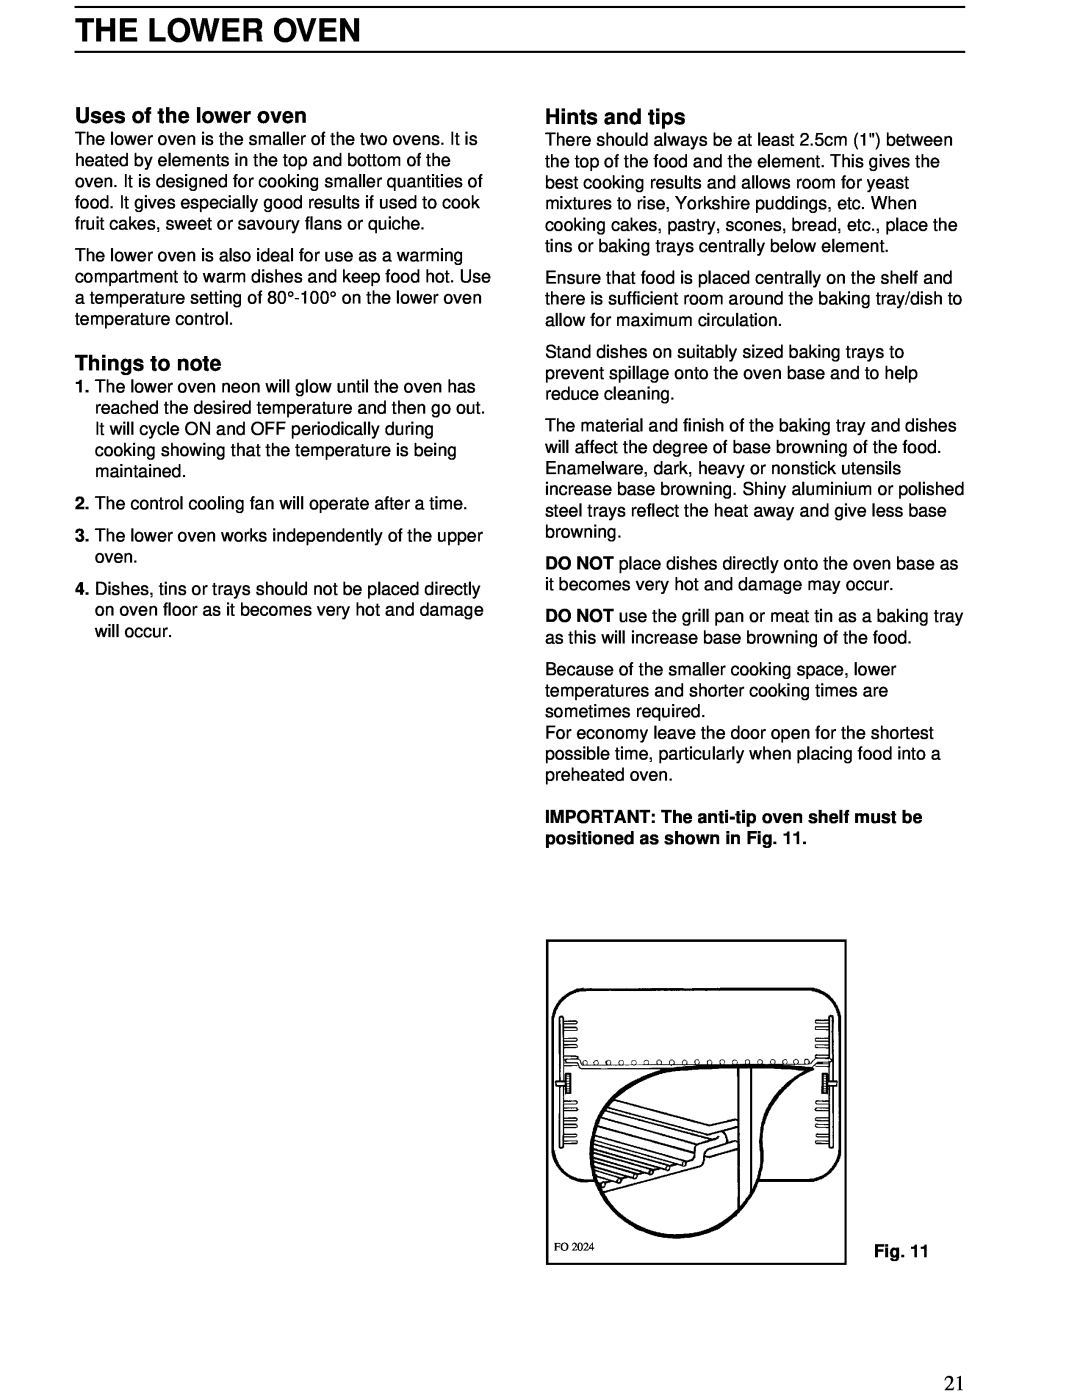 Zanussi ZBD 902 installation manual The Lower Oven, Uses of the lower oven, Things to note, Hints and tips 